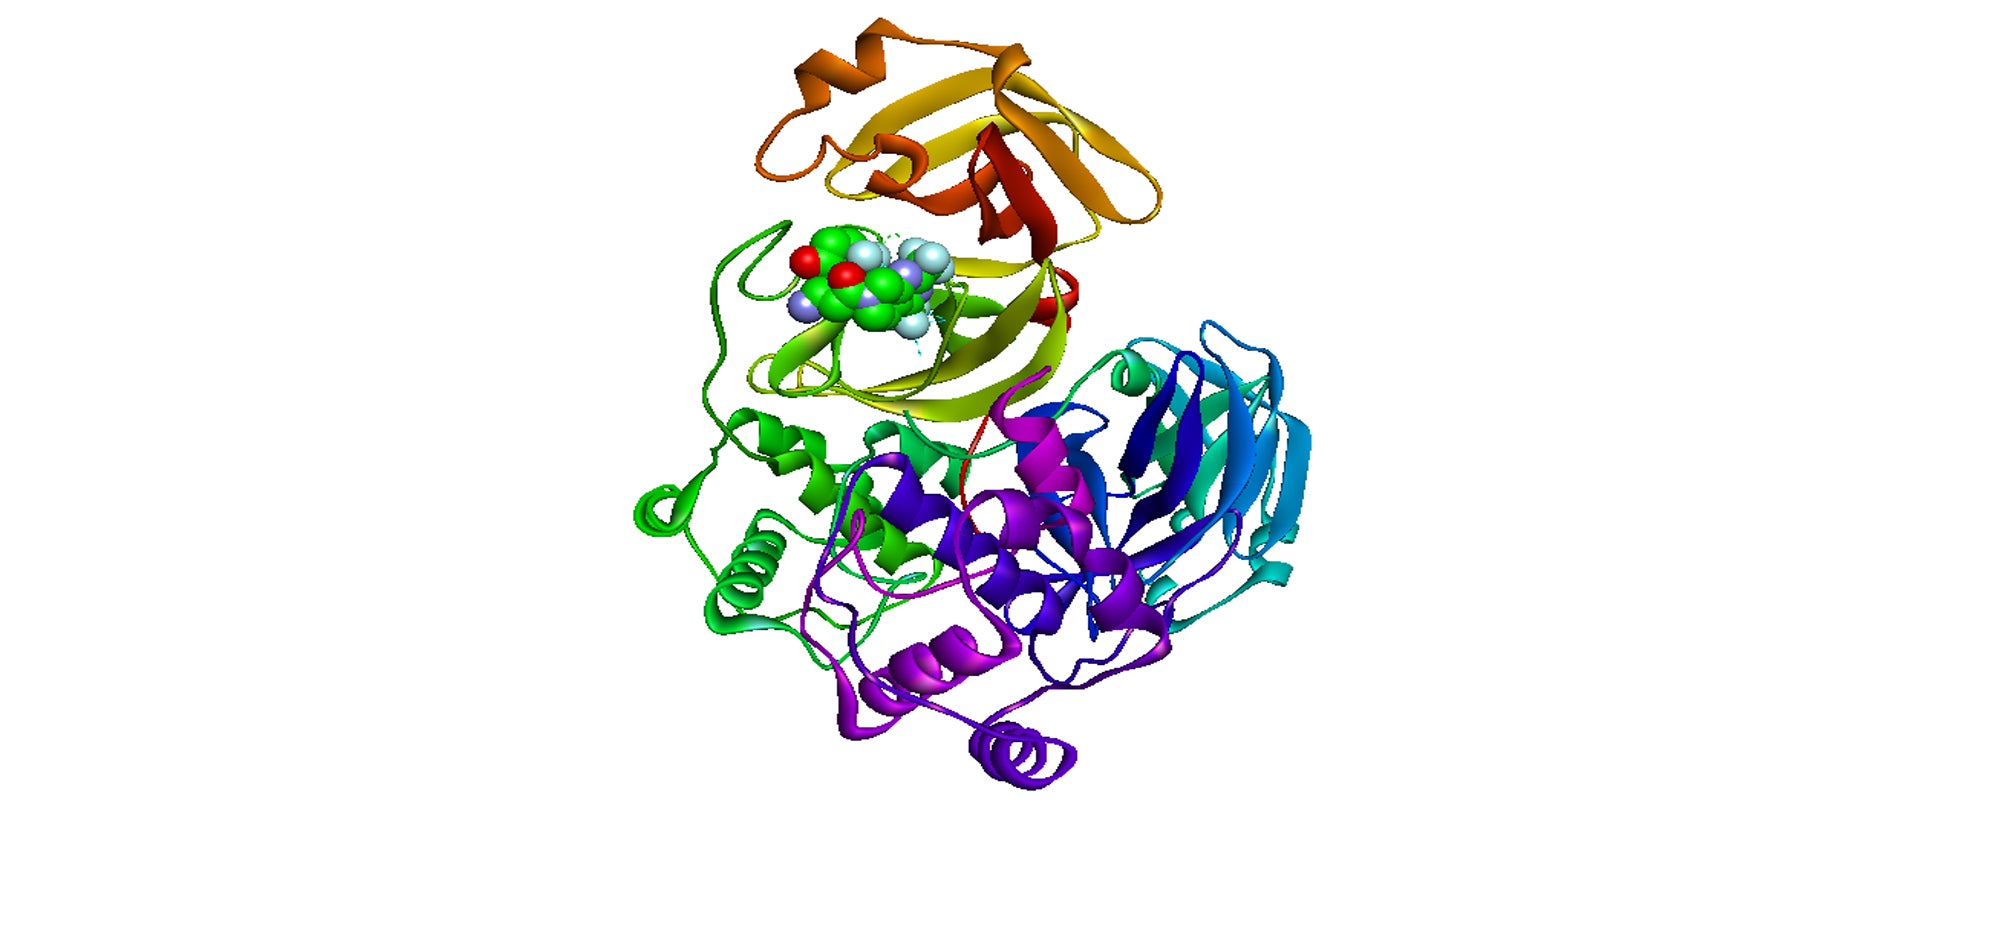 A known drug (DPP4 inhibitor) bound to Covid-19 protein called SARS-CoV-2 Mpro, which is involved in its replication.